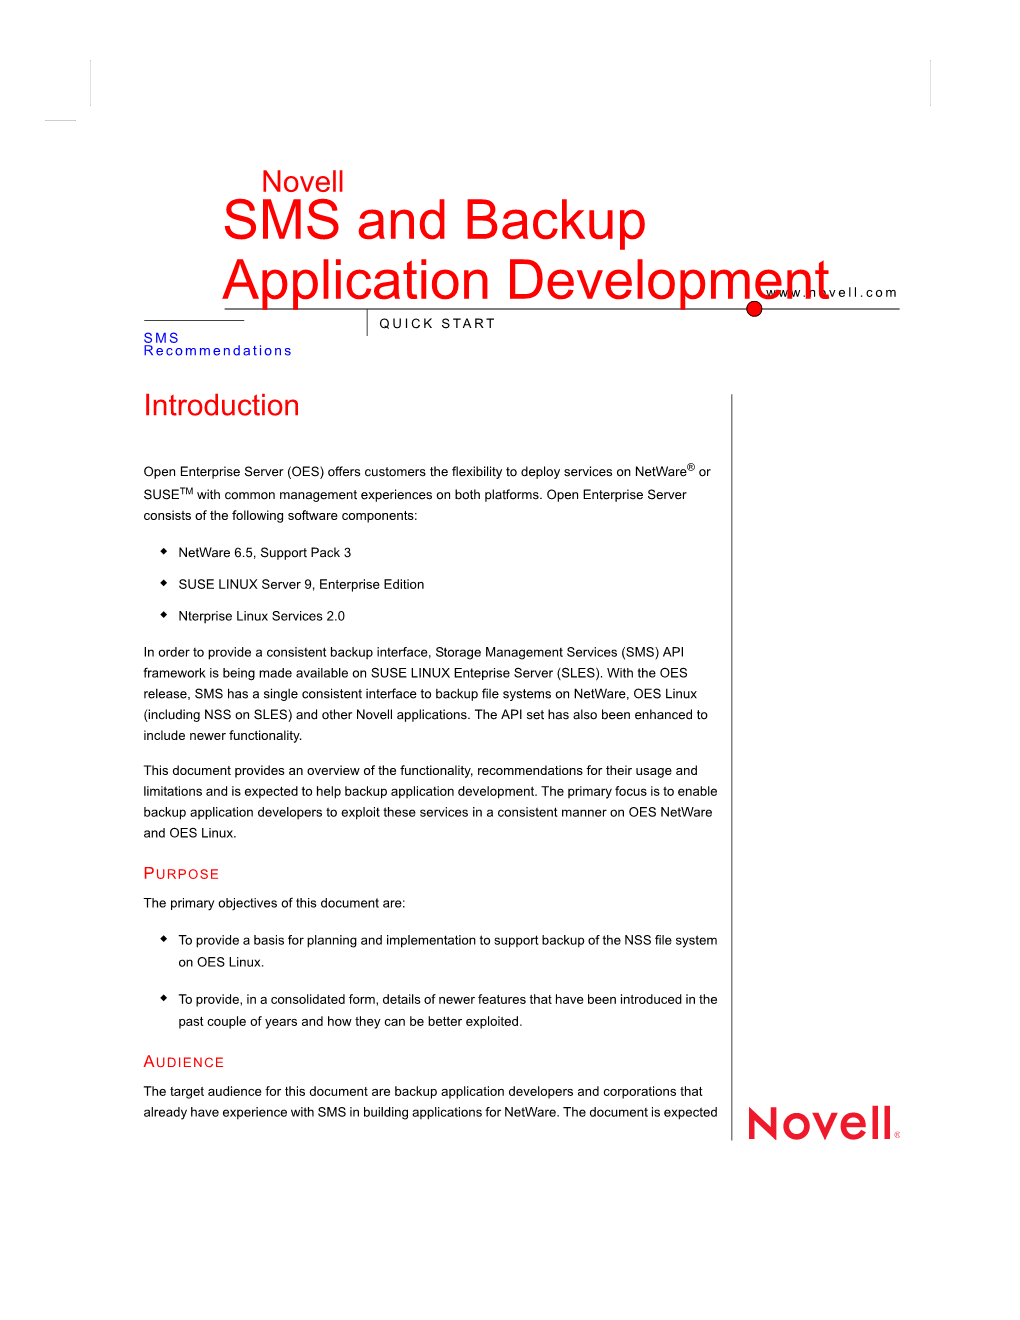 SMS and Backup Application Development